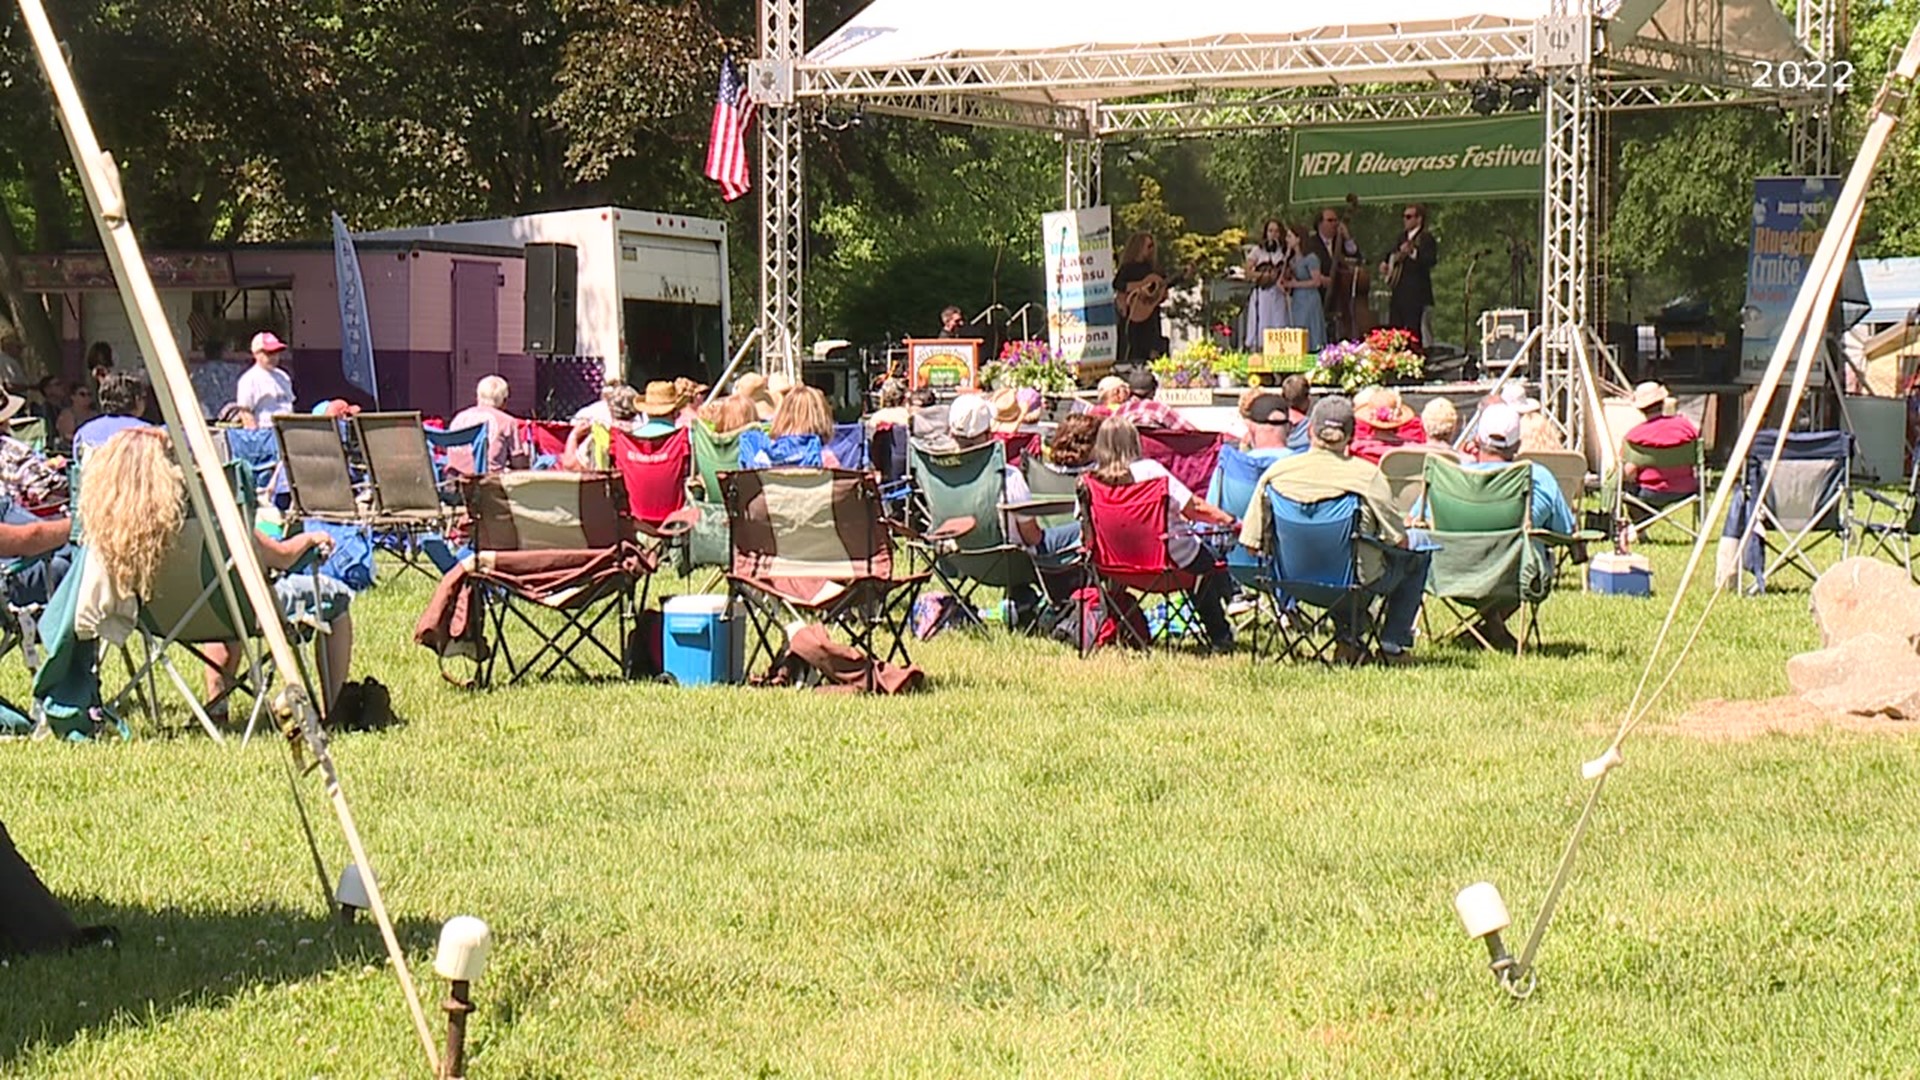 The annual music festival opened its gates for the weekend in anticipation of three days of music on two stages that draw bigger crowds each year.